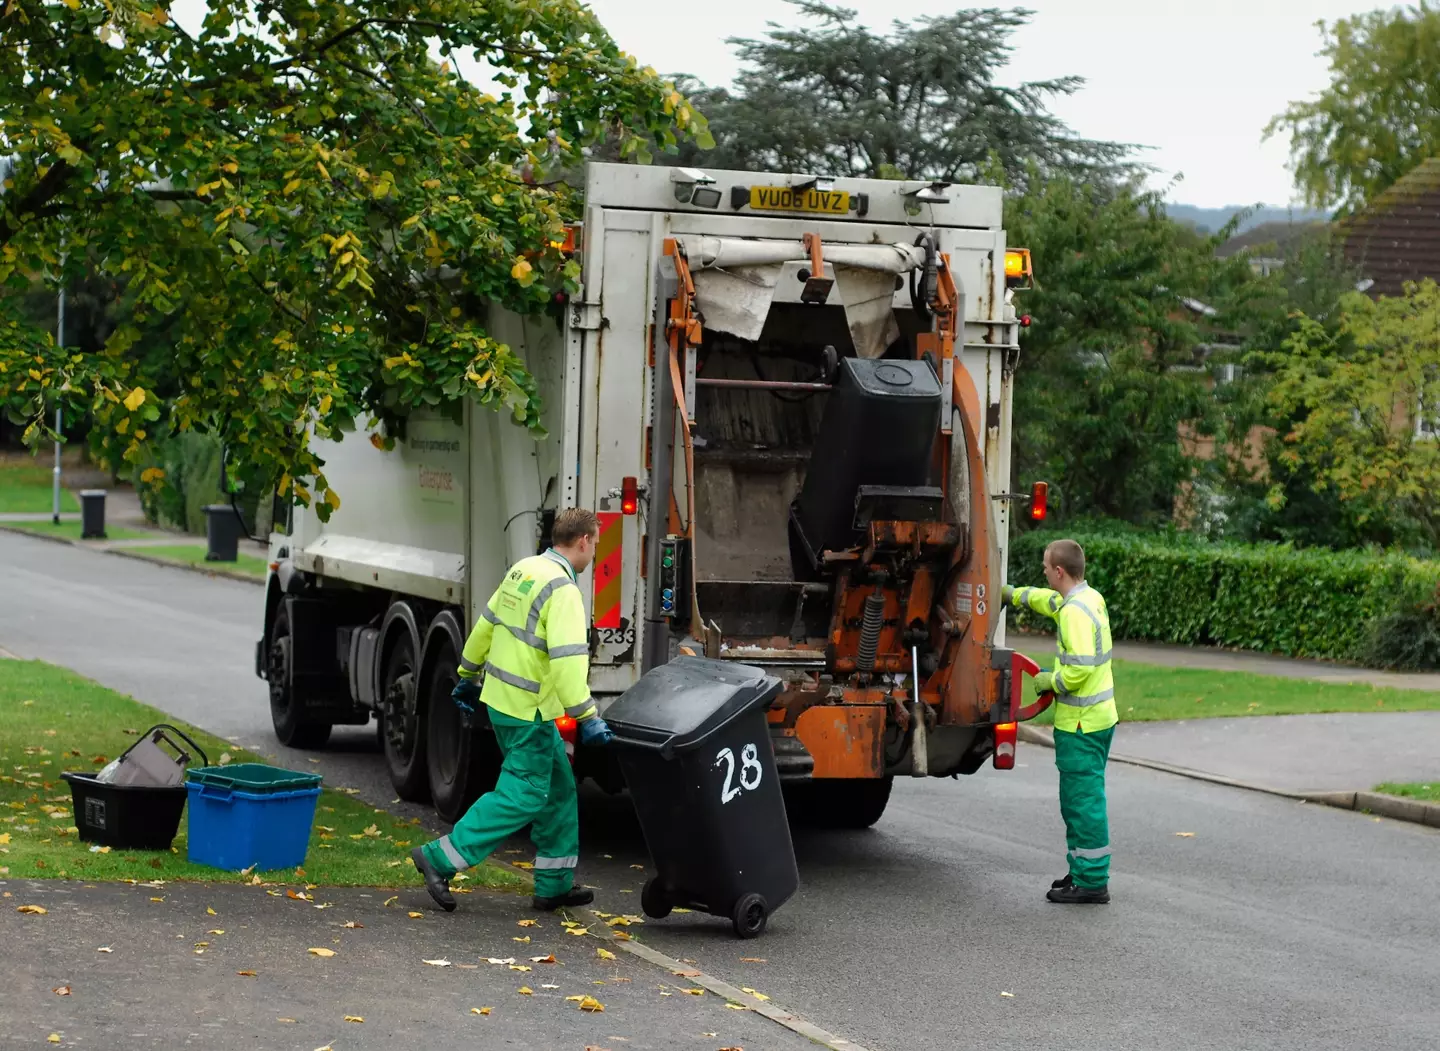 The sanitation workers were shocked to find a girl in the bin.